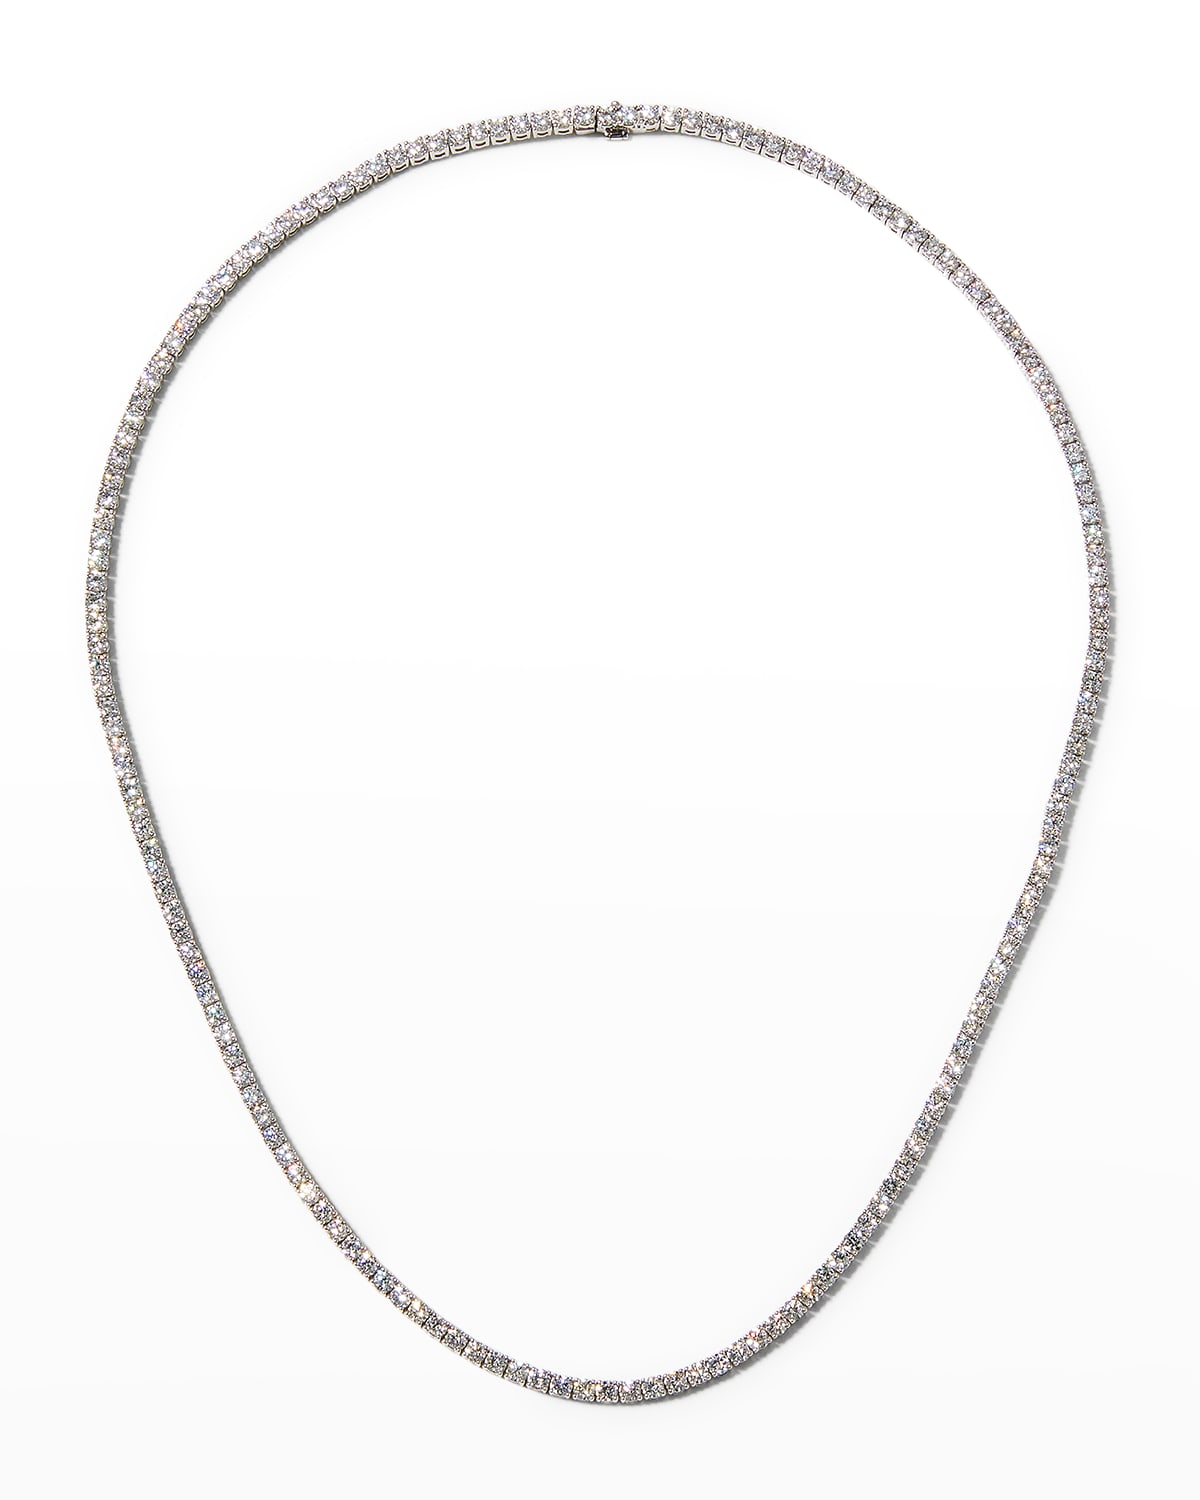 White Gold 4-Prong Diamond Line Necklace, 8.0tcw